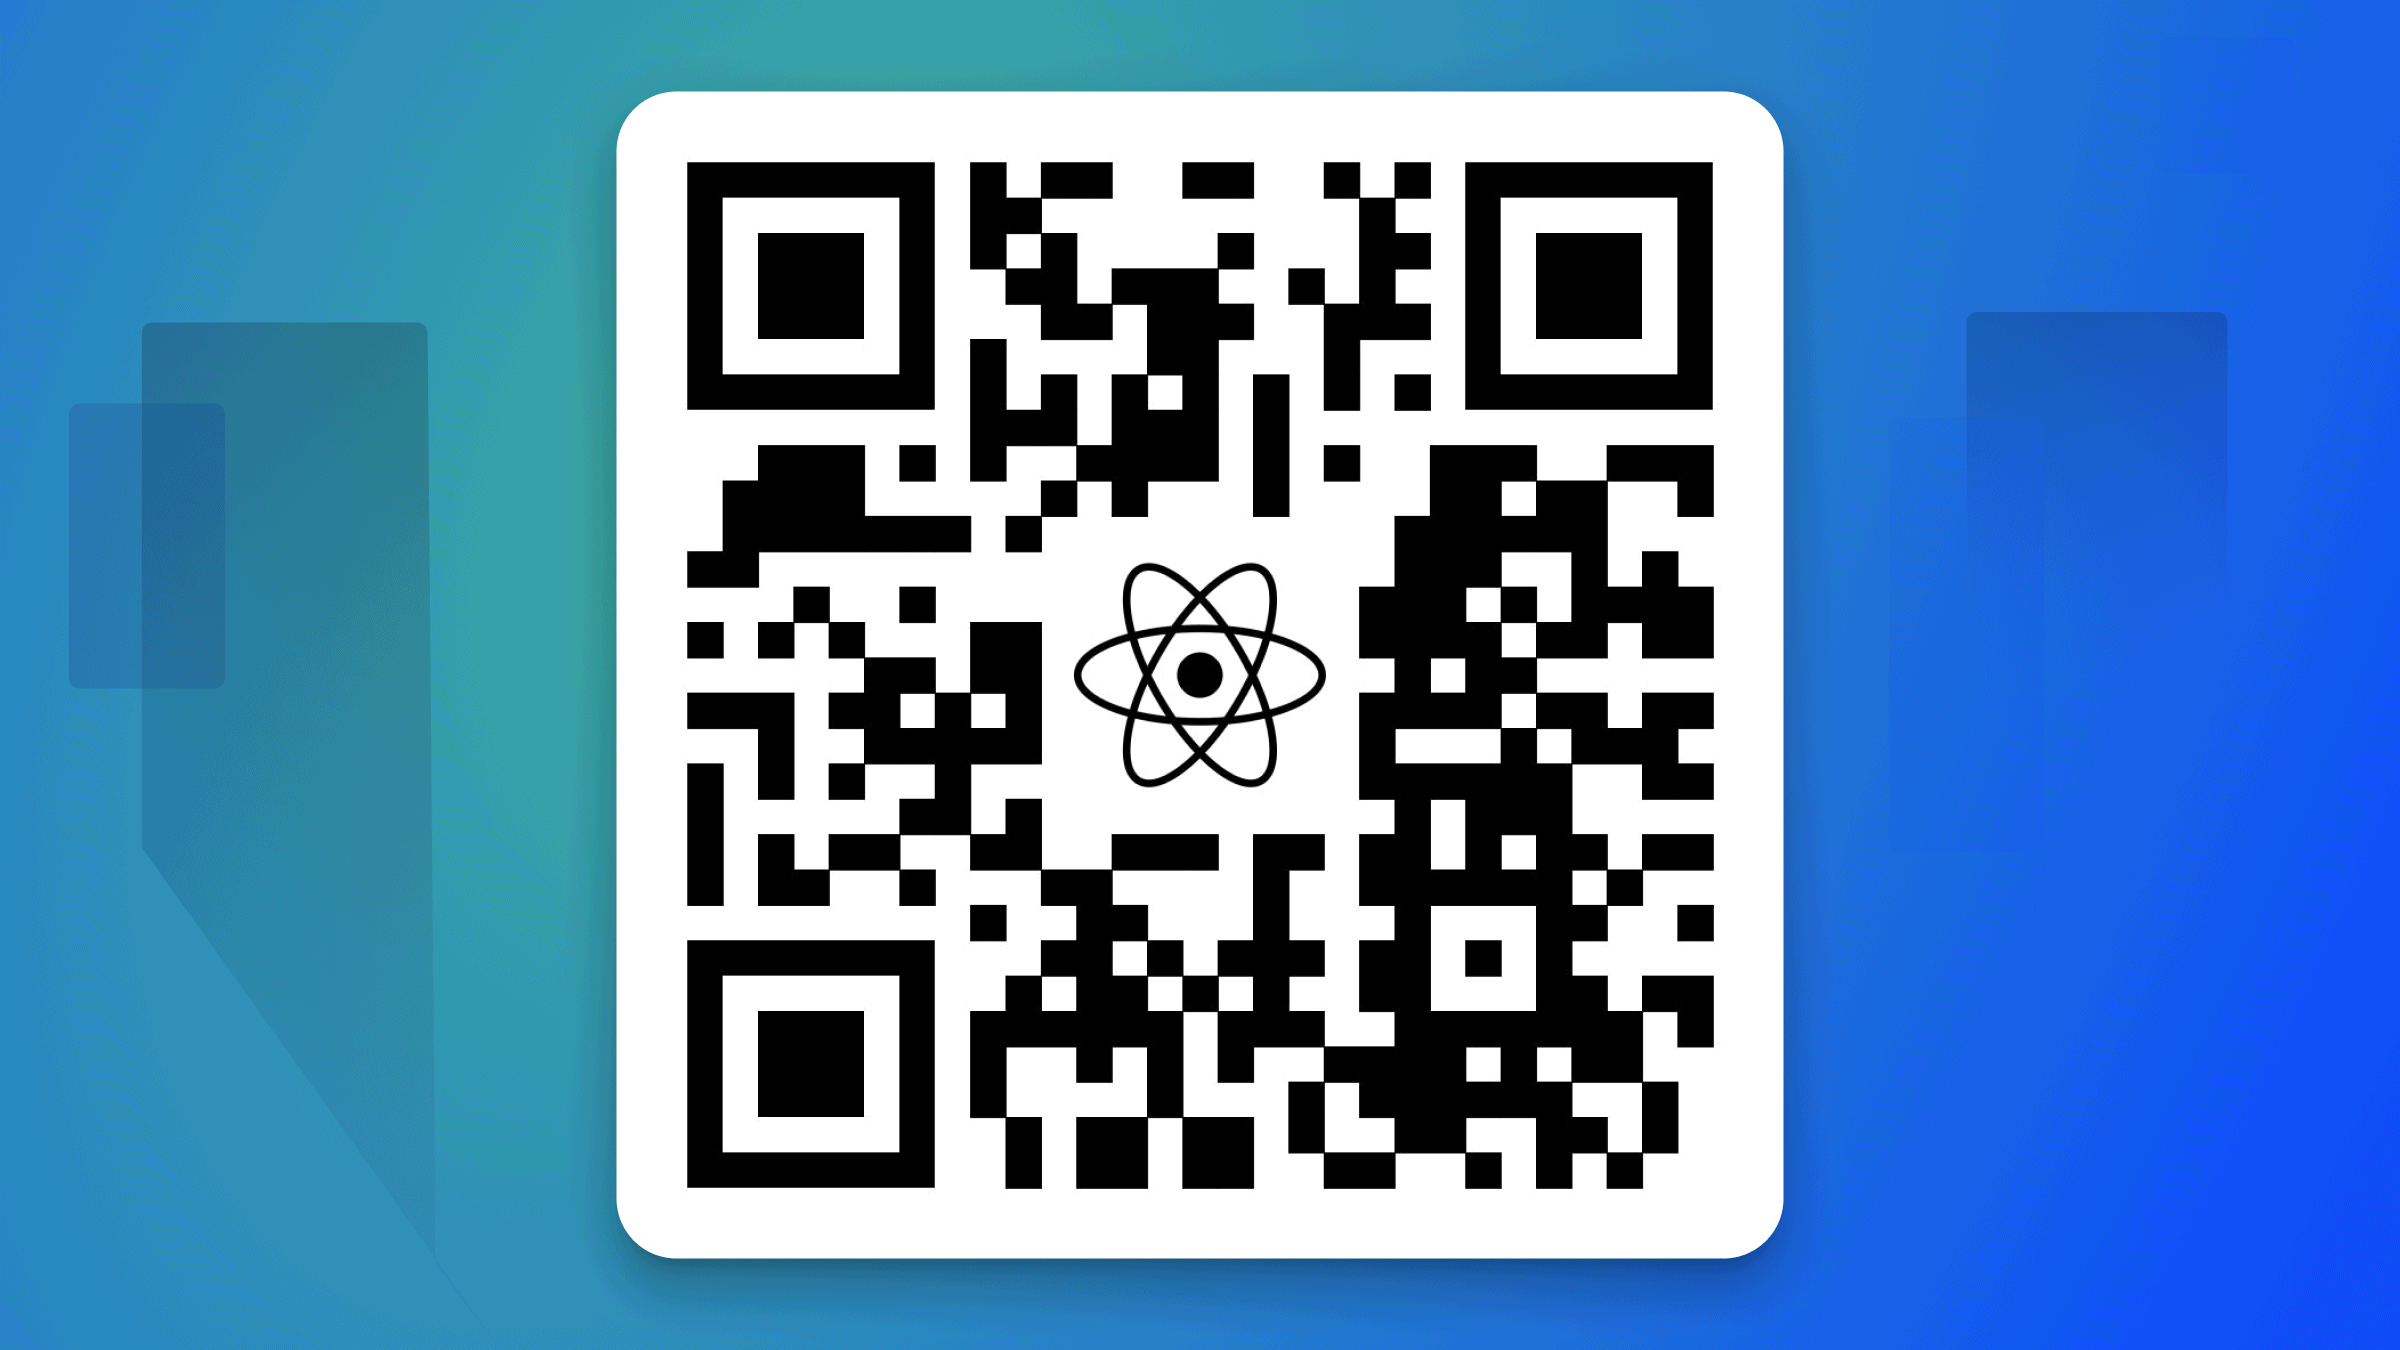 Creating QR Codes with React Native